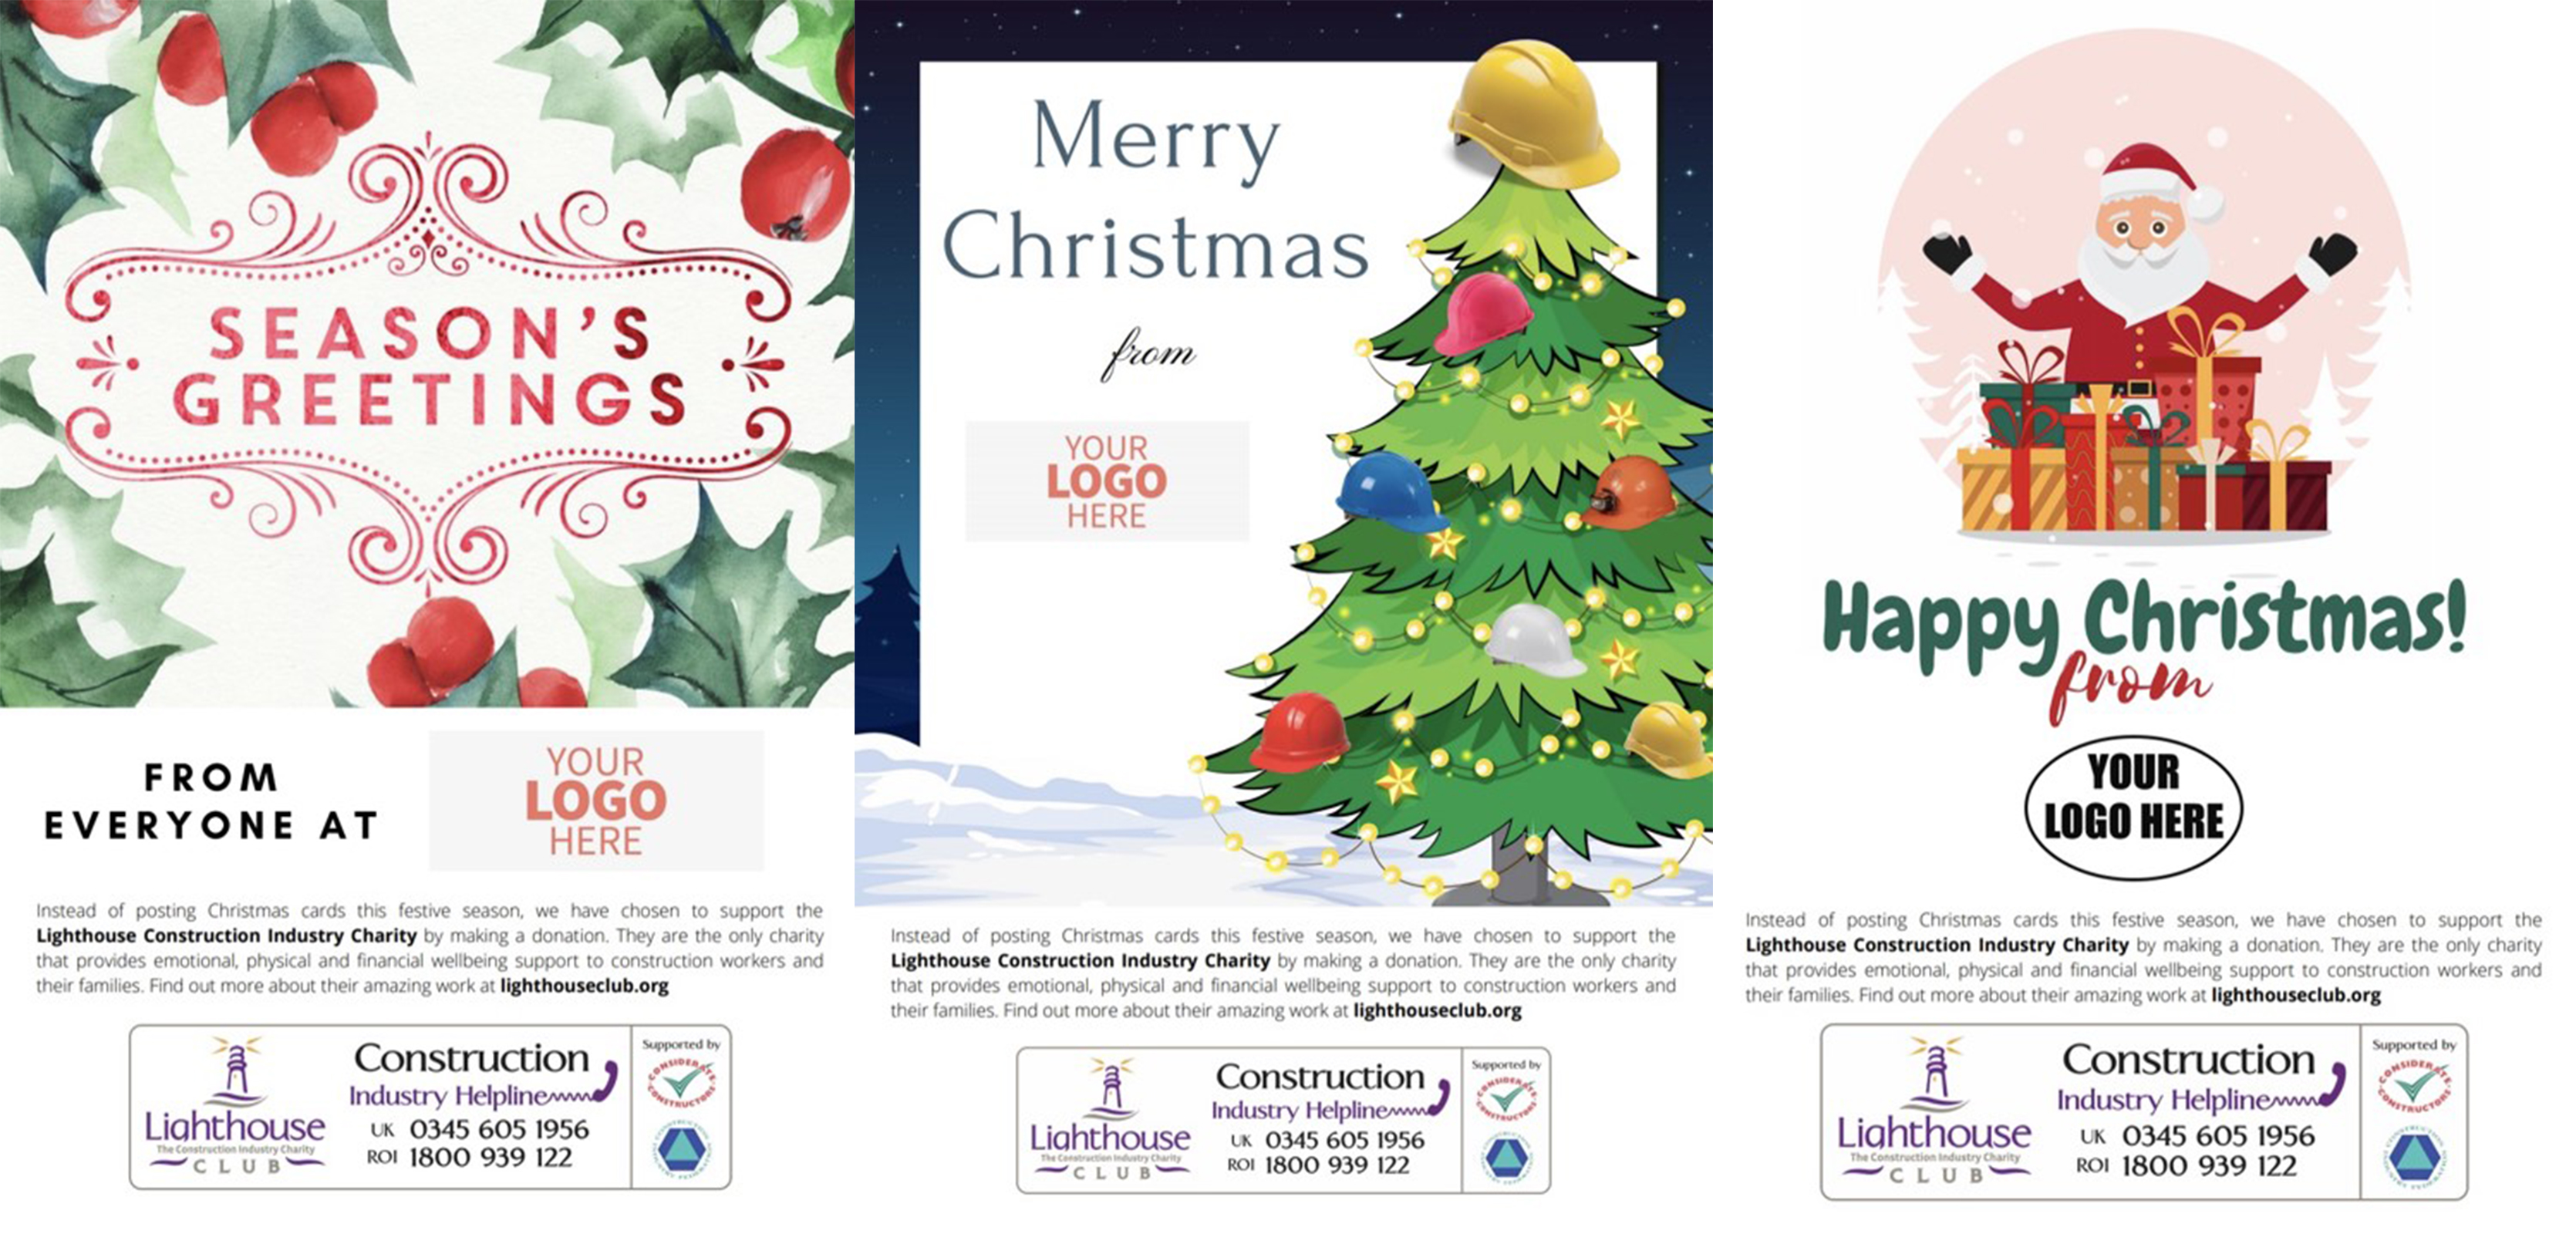 Lighthouse charity launches festive e-cards